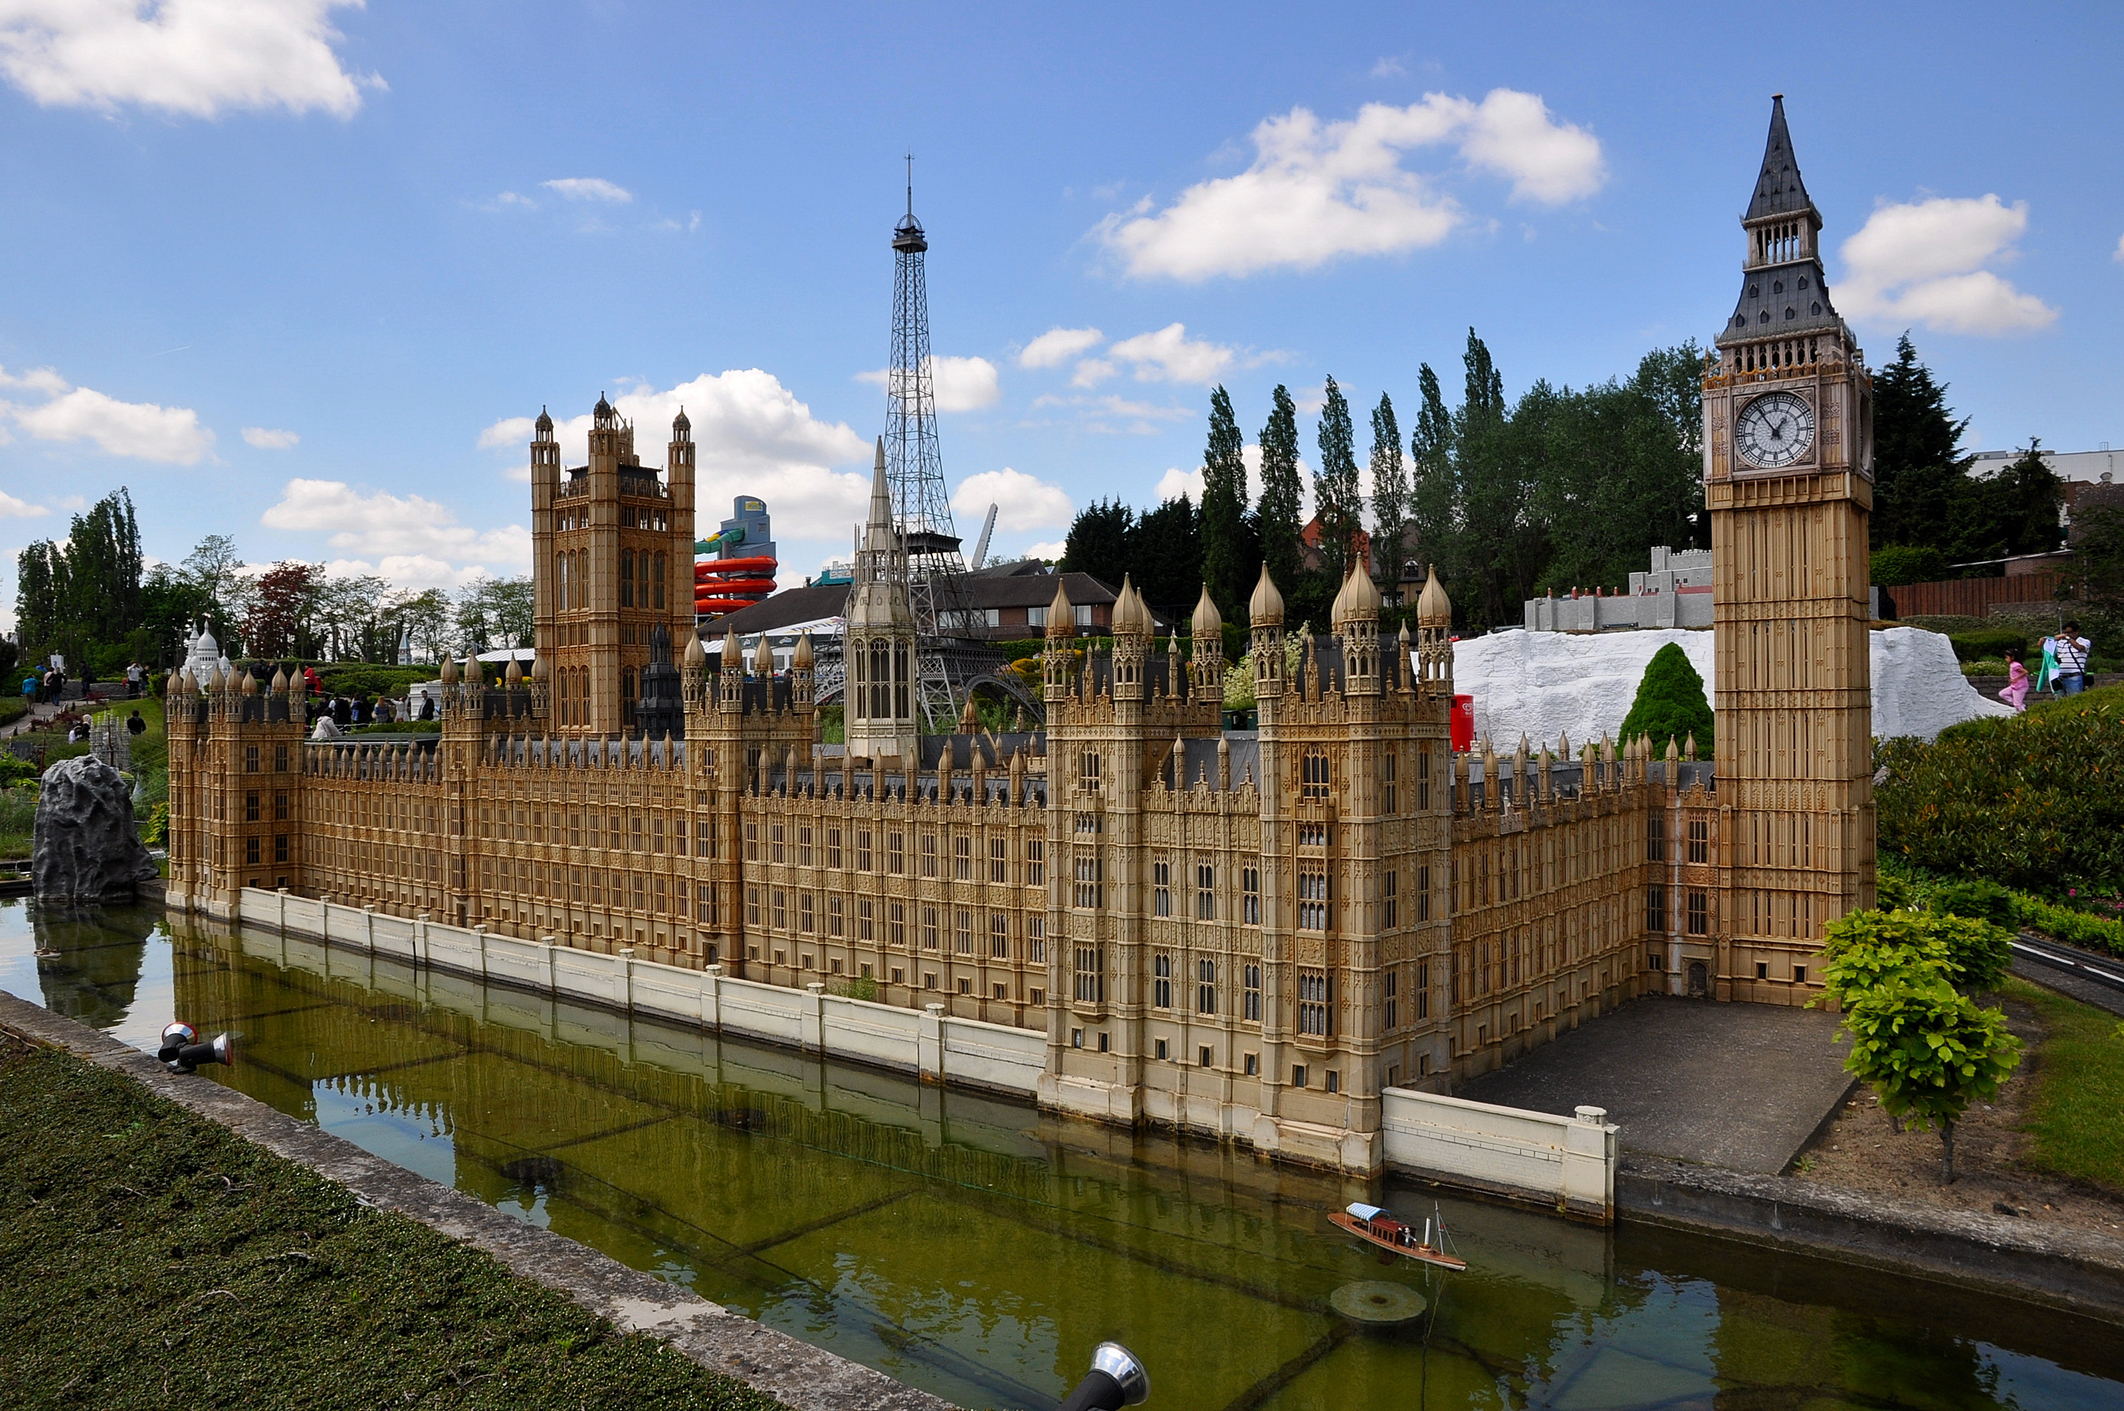 Models of Europe's most famous buildings at Mini Europe, in Brussels